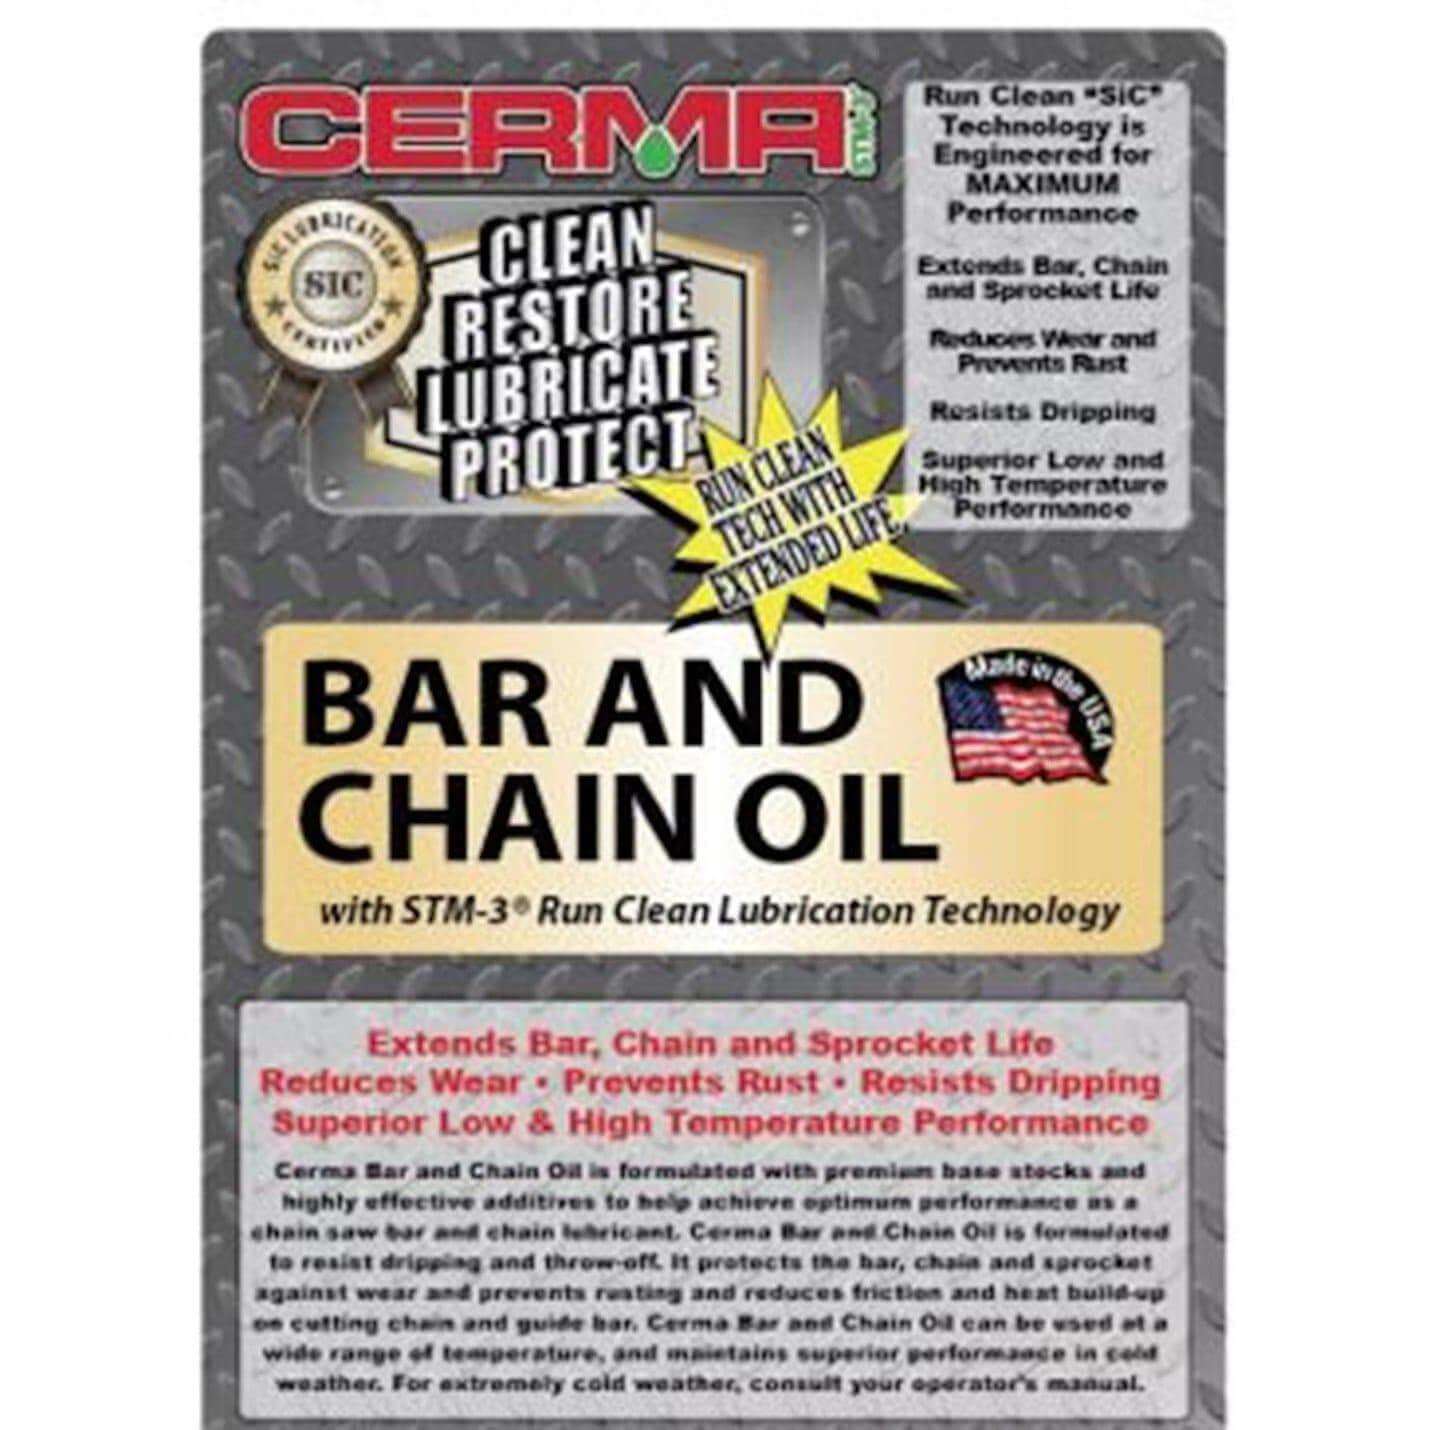 Cermax Ceramic Bar and Chain Oil for Maximum Protection at $10.34 only from cermatreatment.com